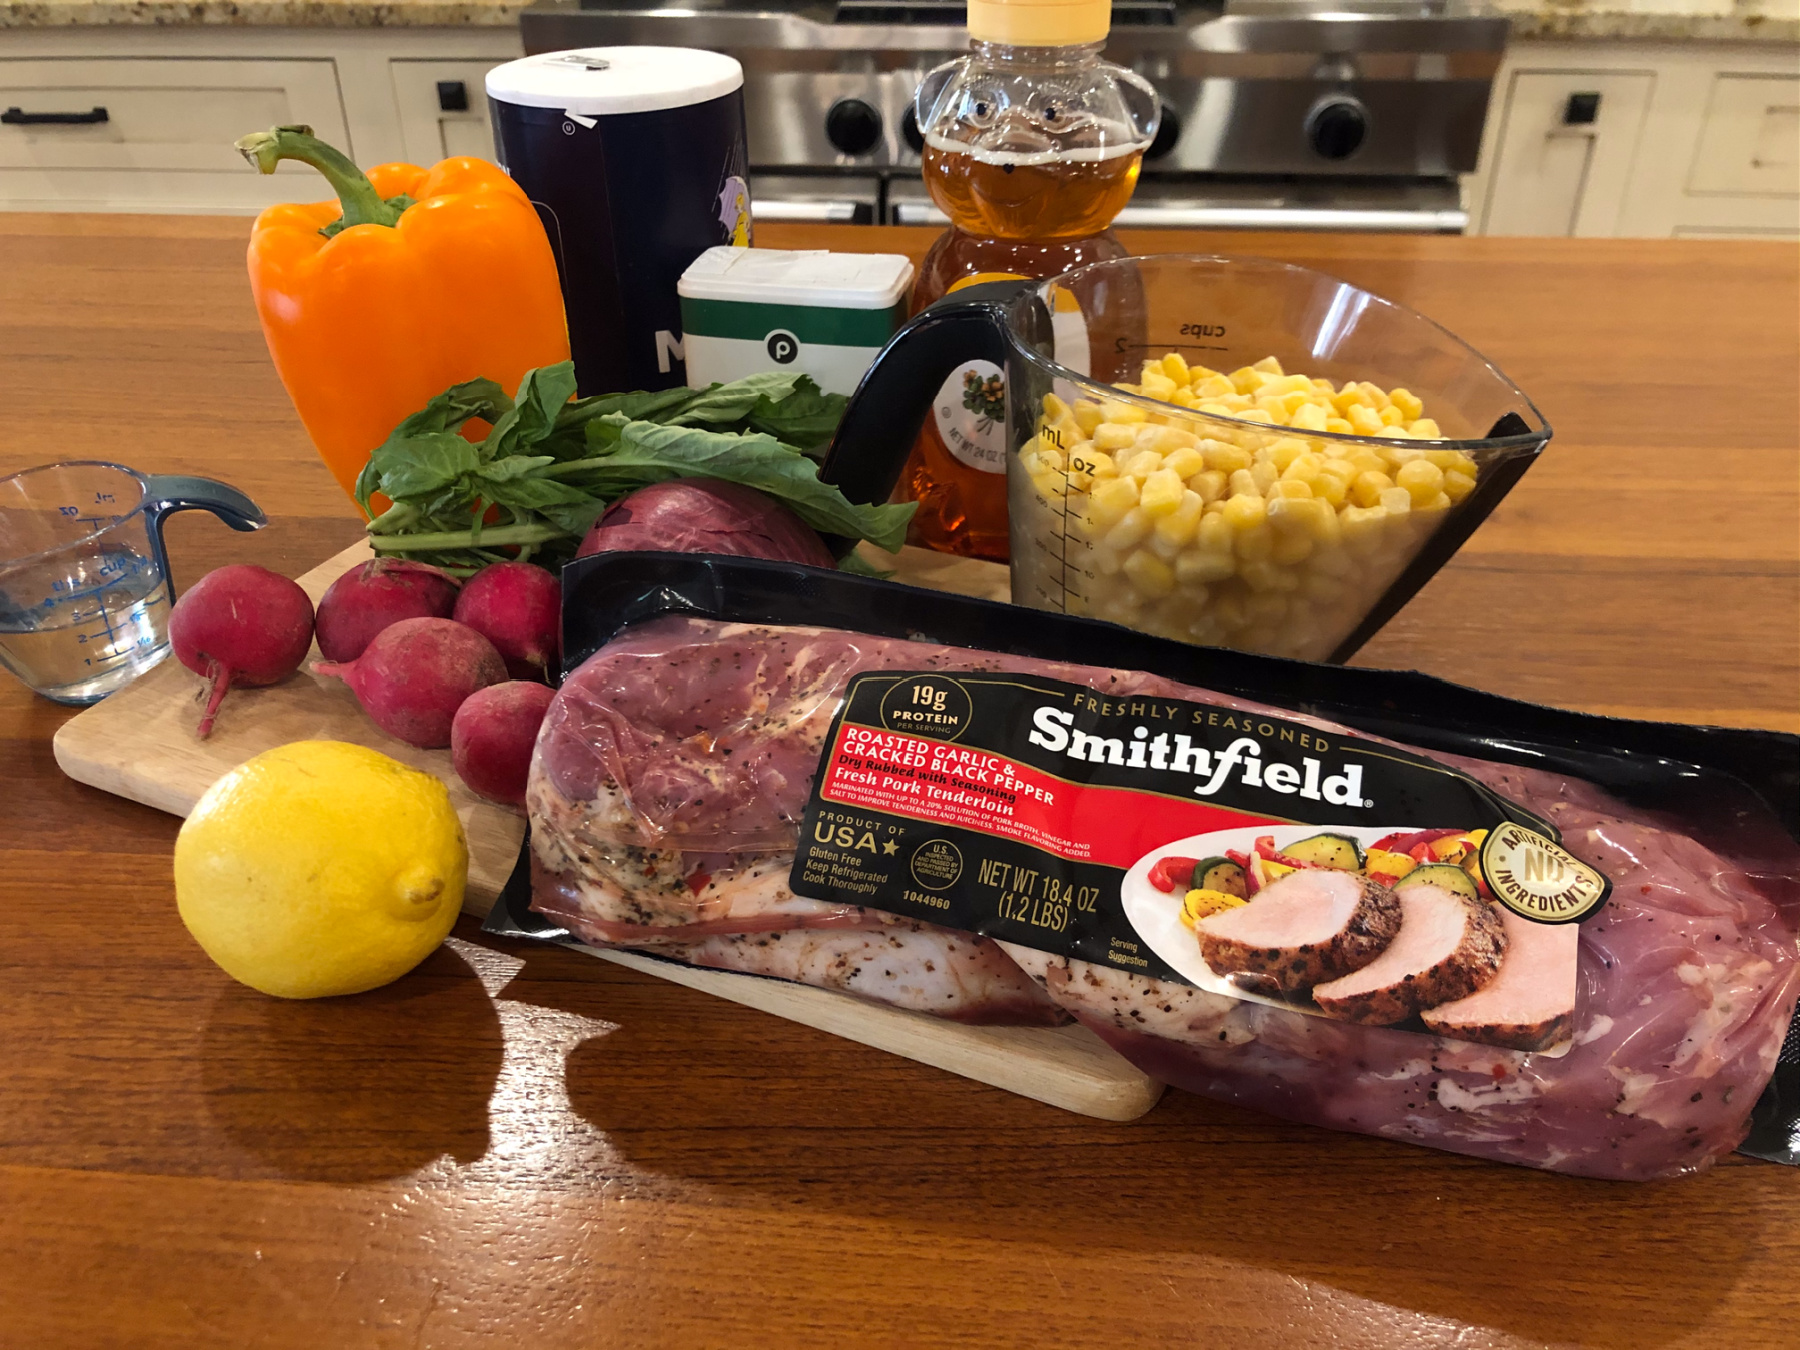 Smithfield Marinated Fresh Pork Is BOGO At Publix + Digital Coupon For Even MORE Savings! on I Heart Publix 1